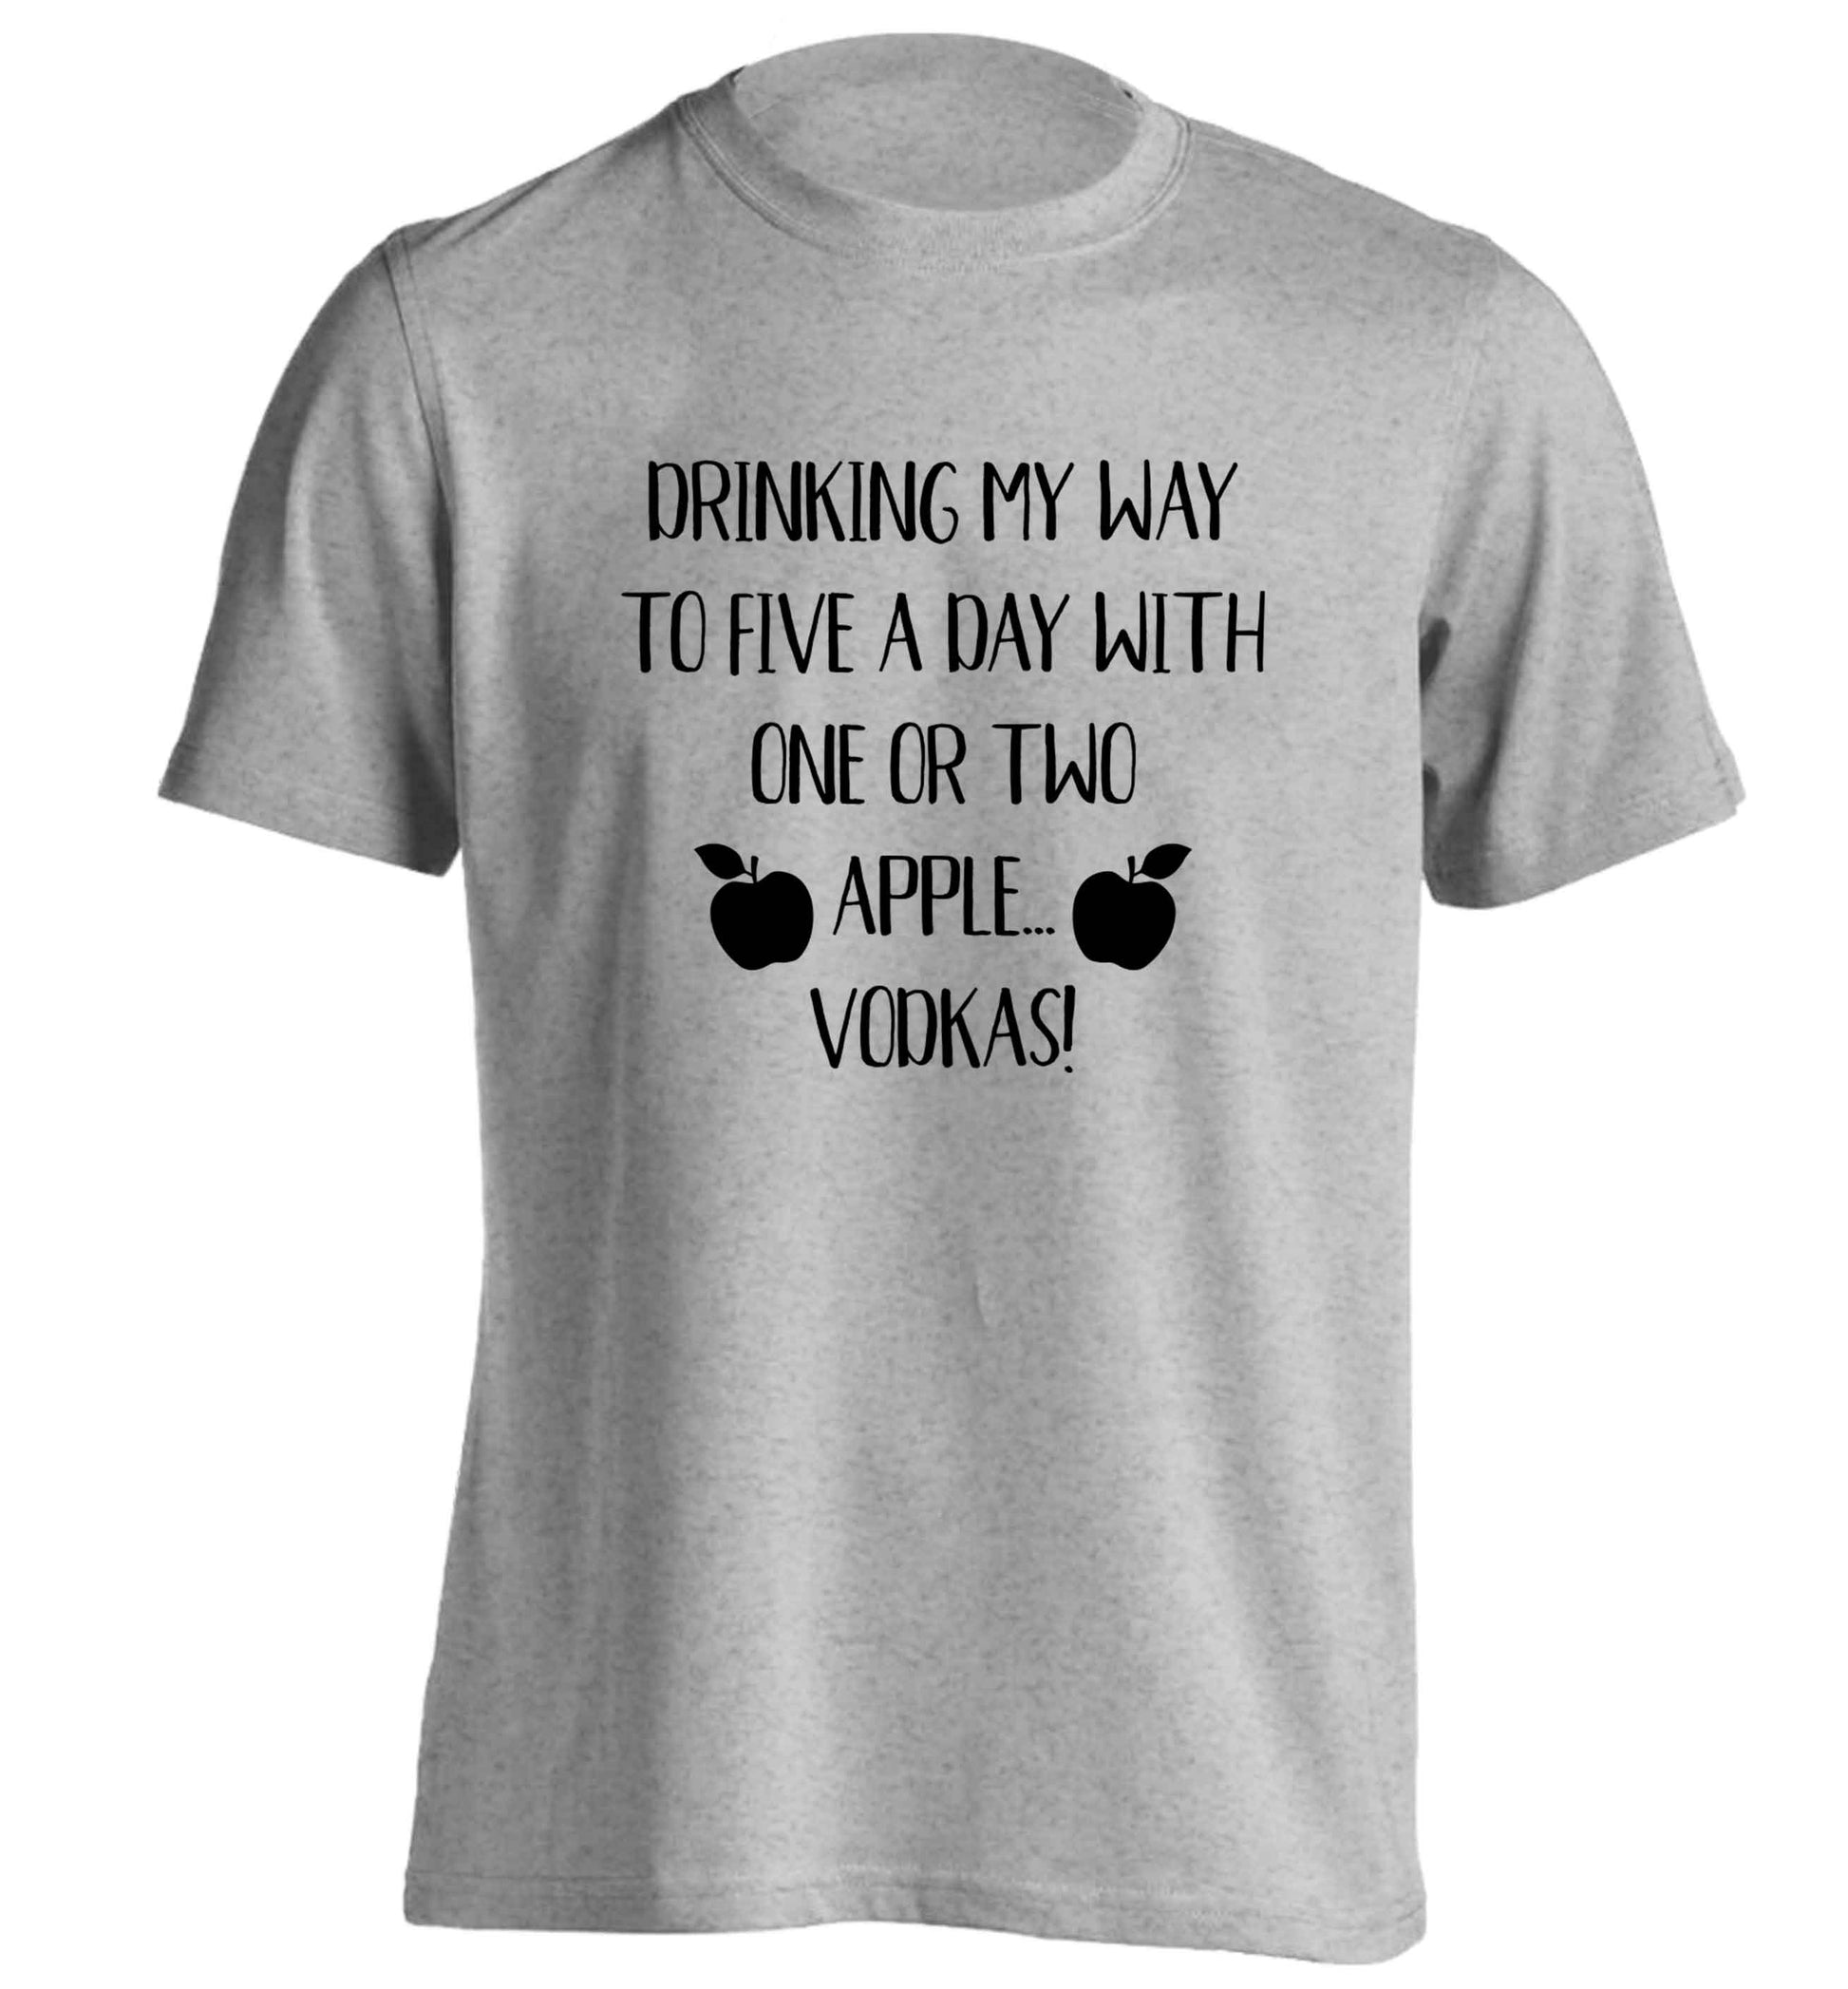 Drinking my way to five a day with one or two apple vodkas adults unisex grey Tshirt 2XL